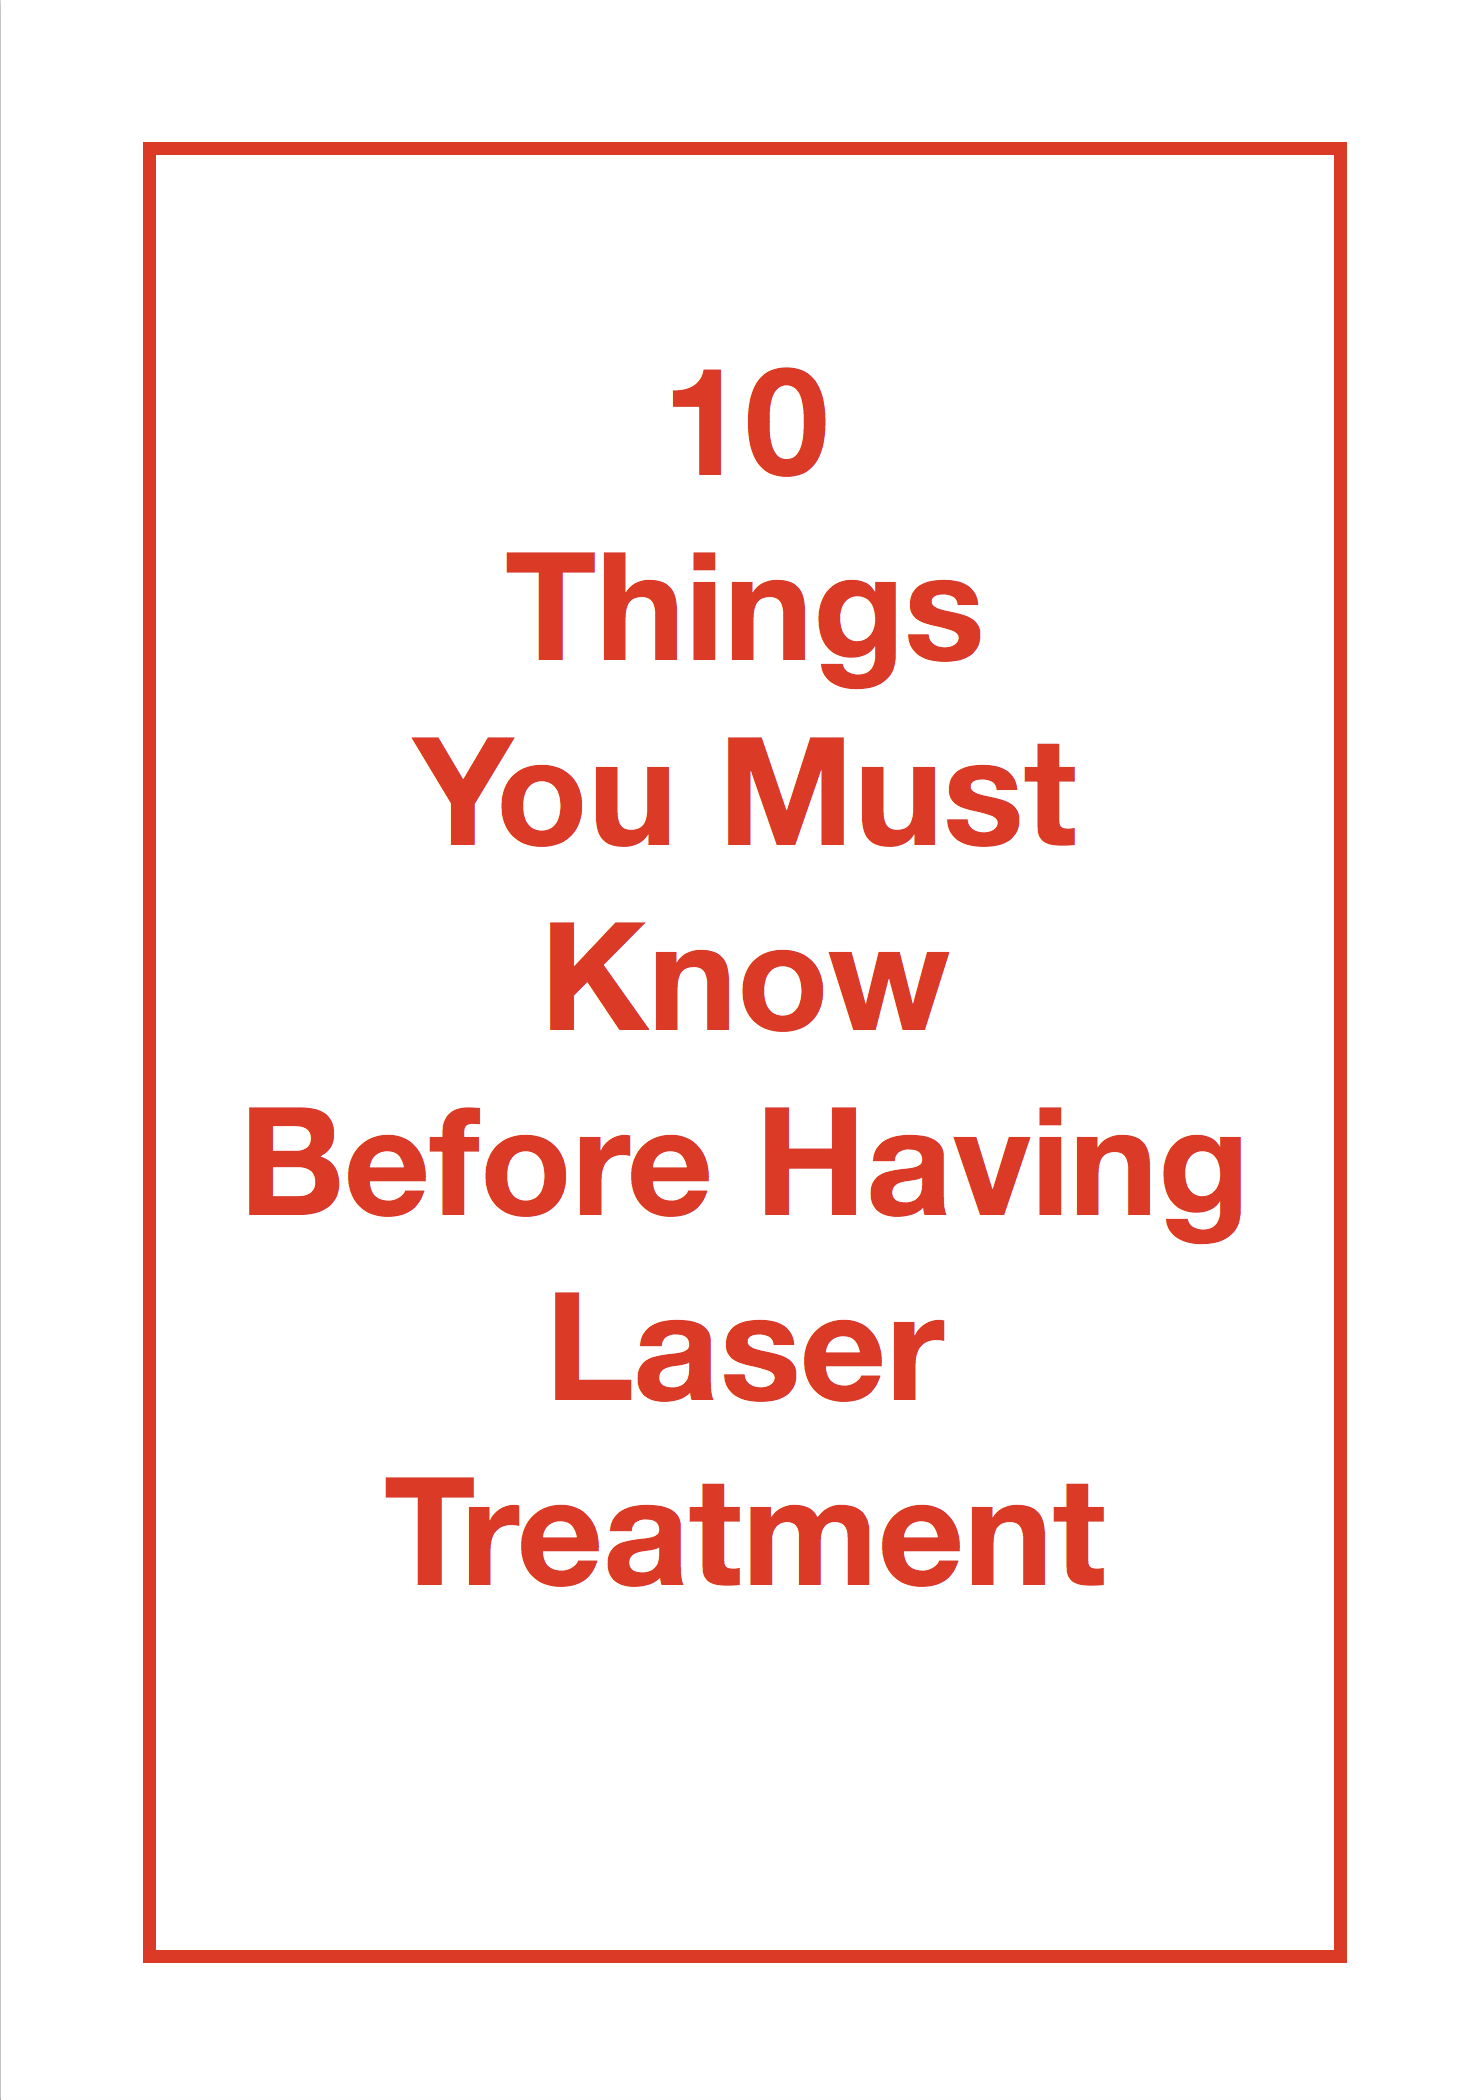 10 things you must know before having laser treatment